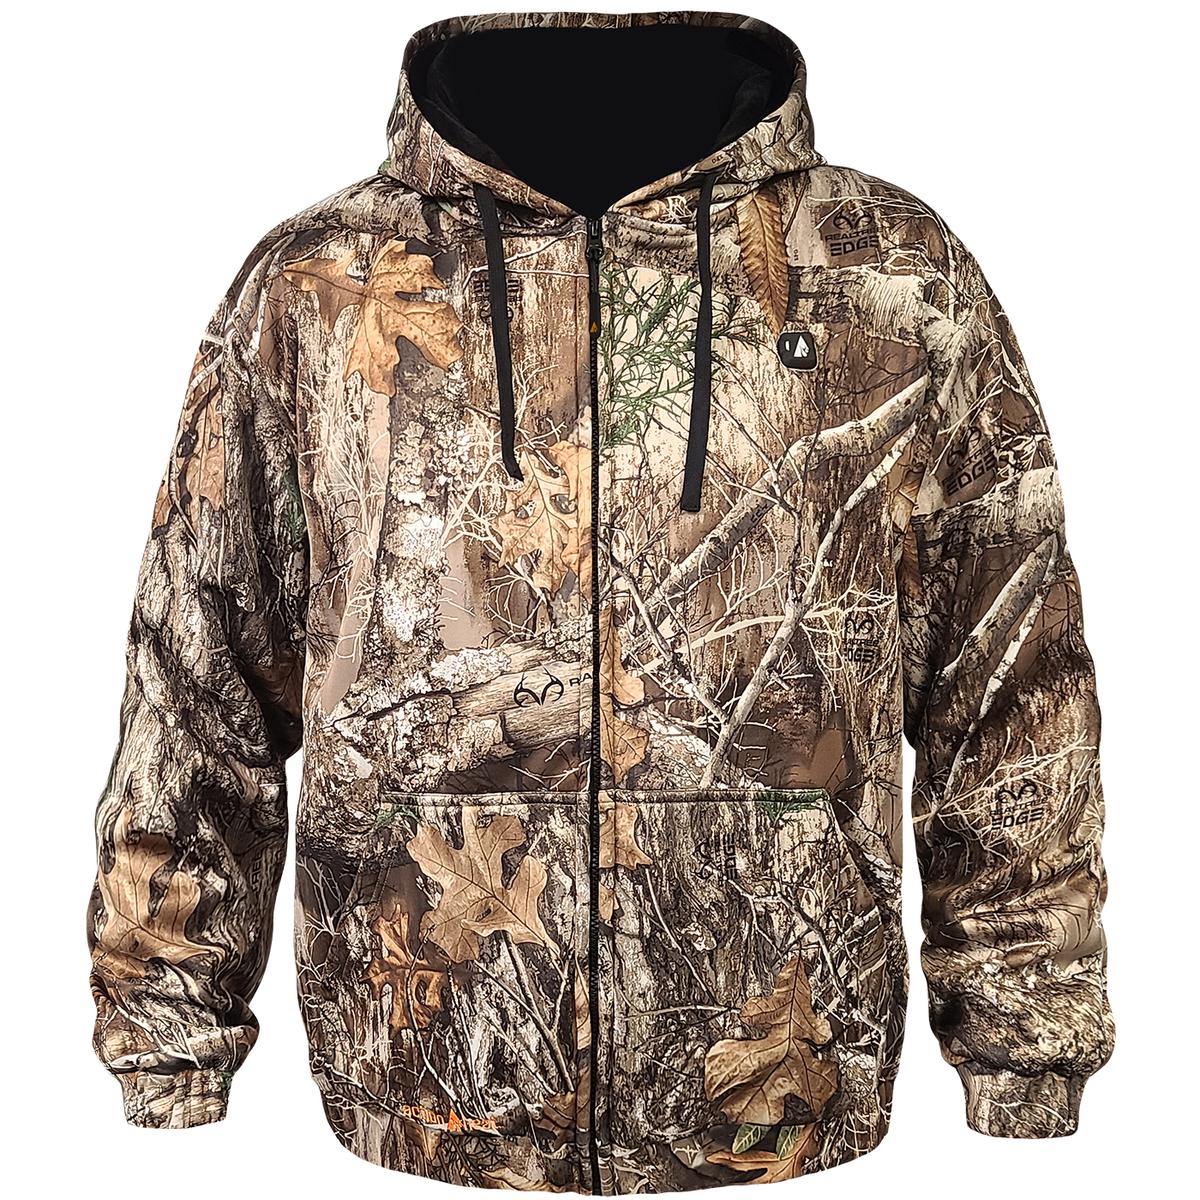 ActionHeat 5V Battery Heated Hunting Hoodie Jacket - Camouflage - Heated